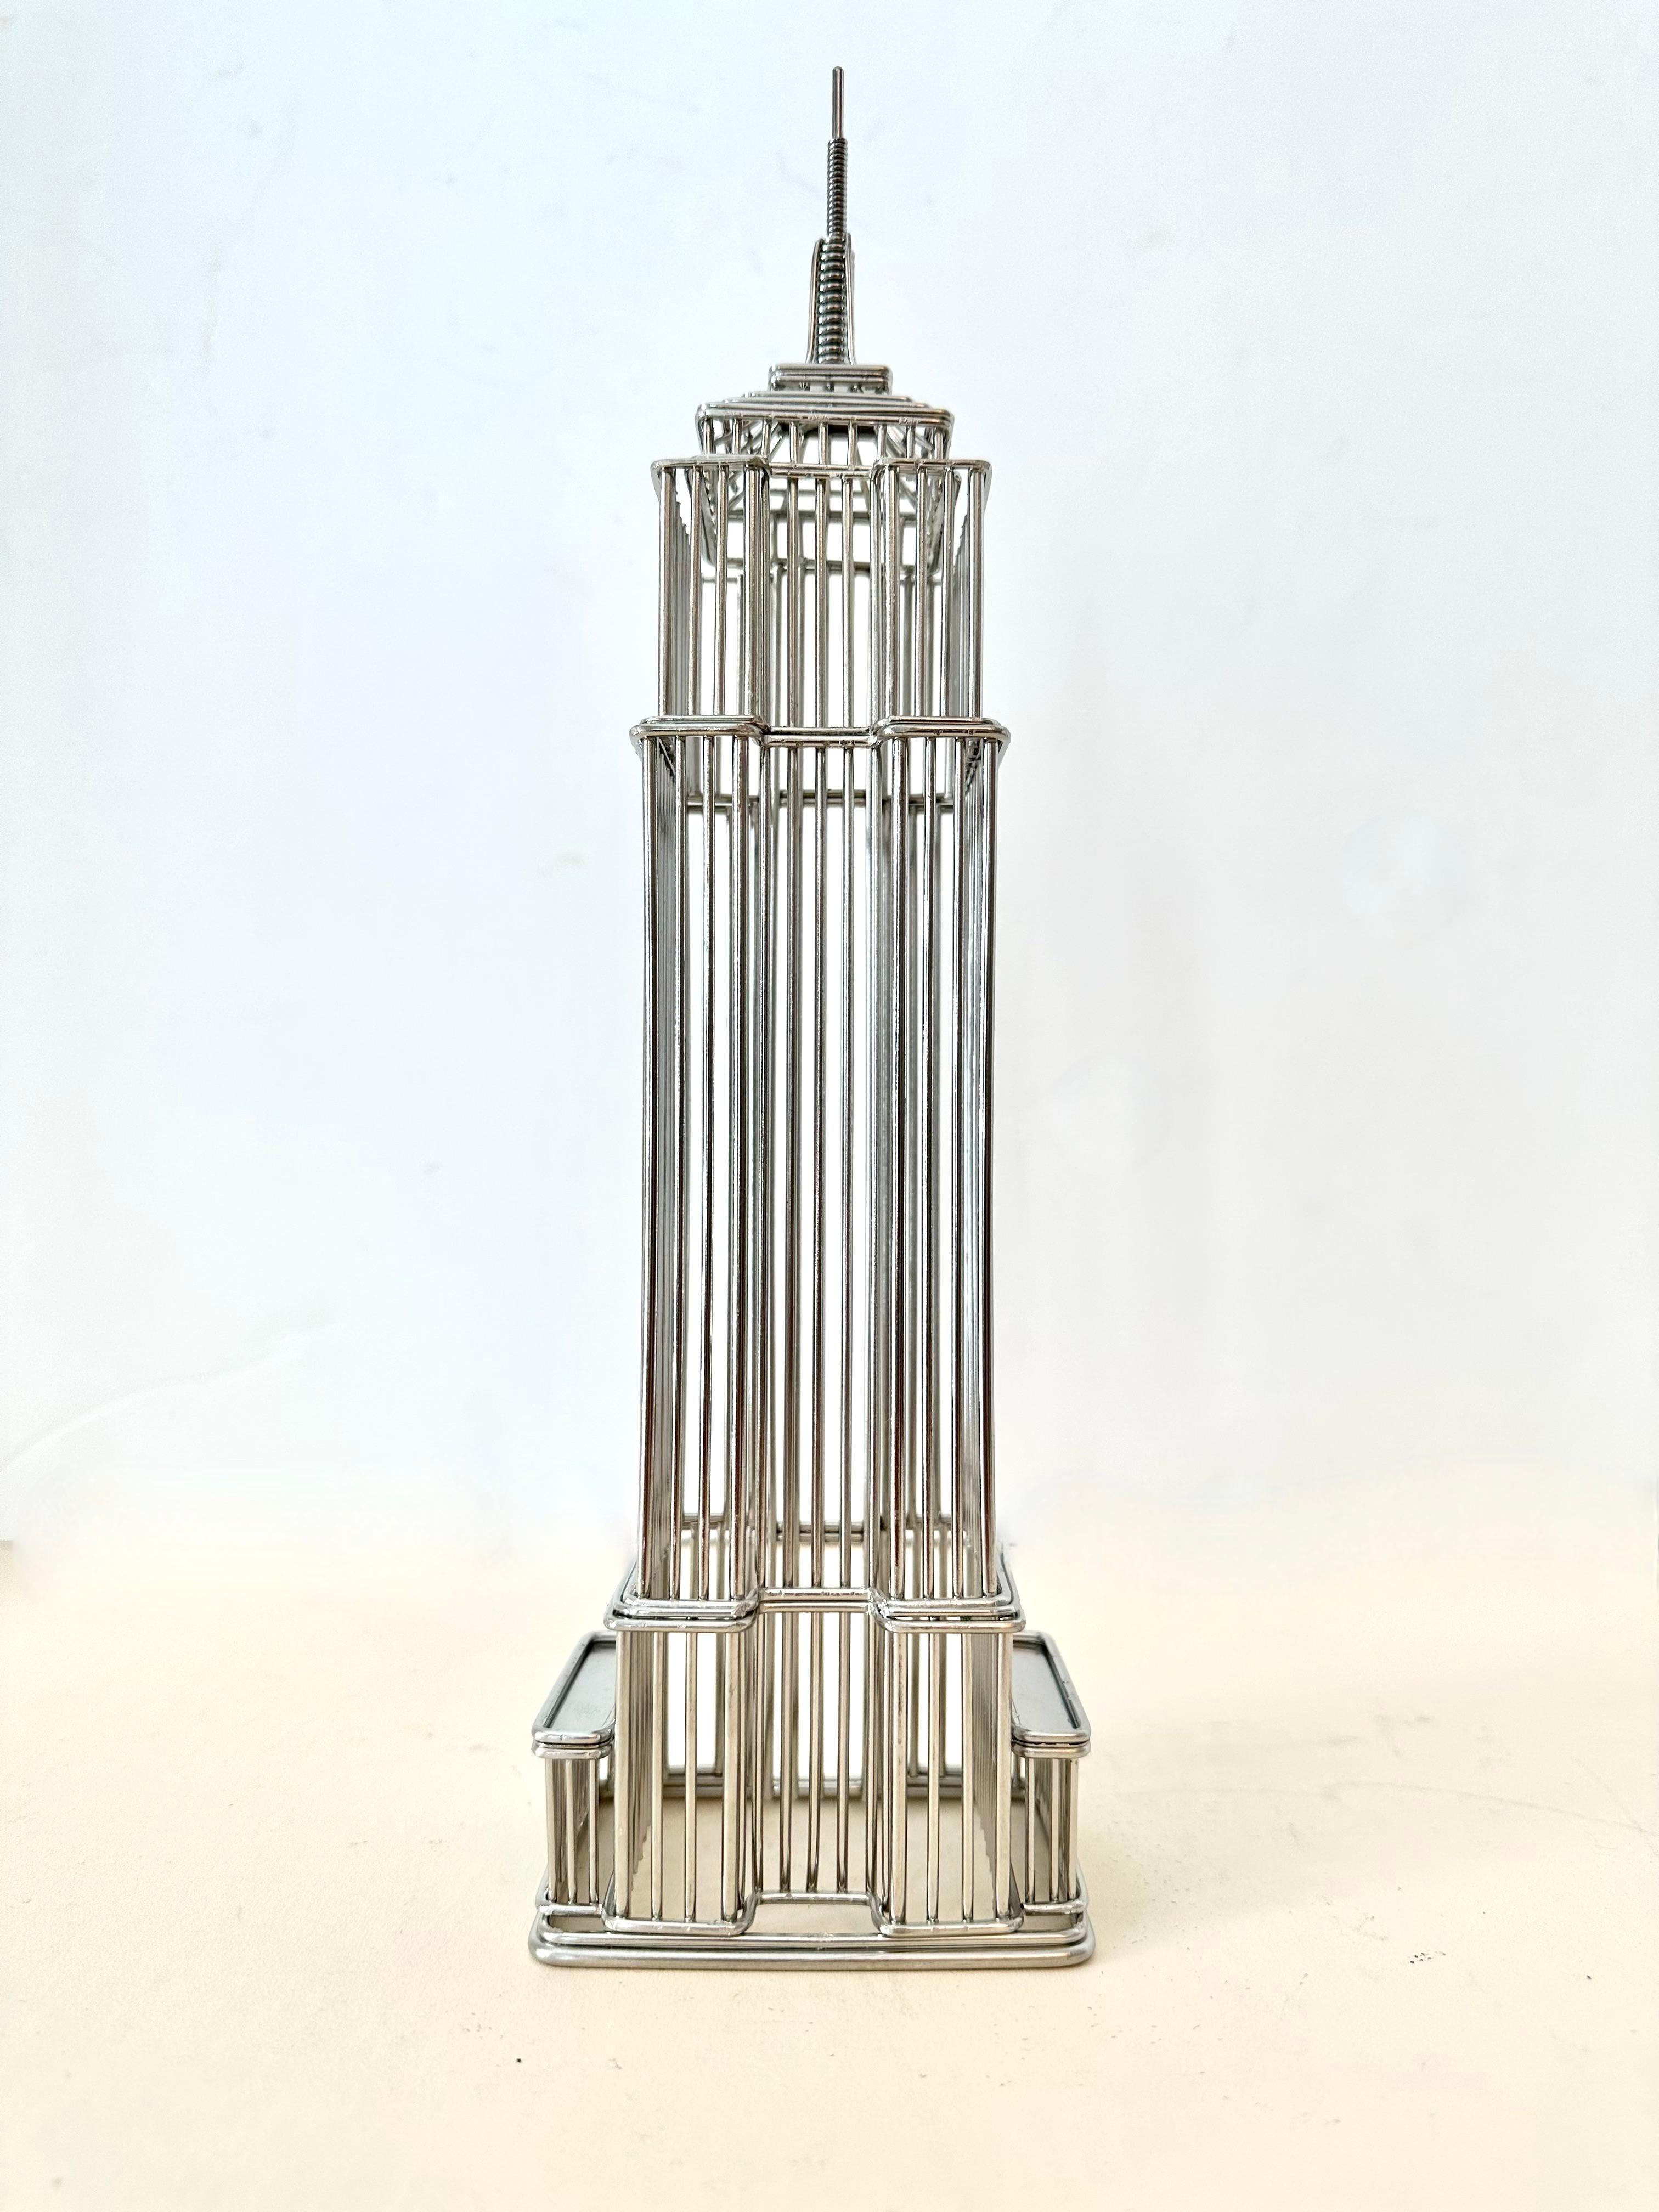 Modern Wire Sculpture of the Empire State Building